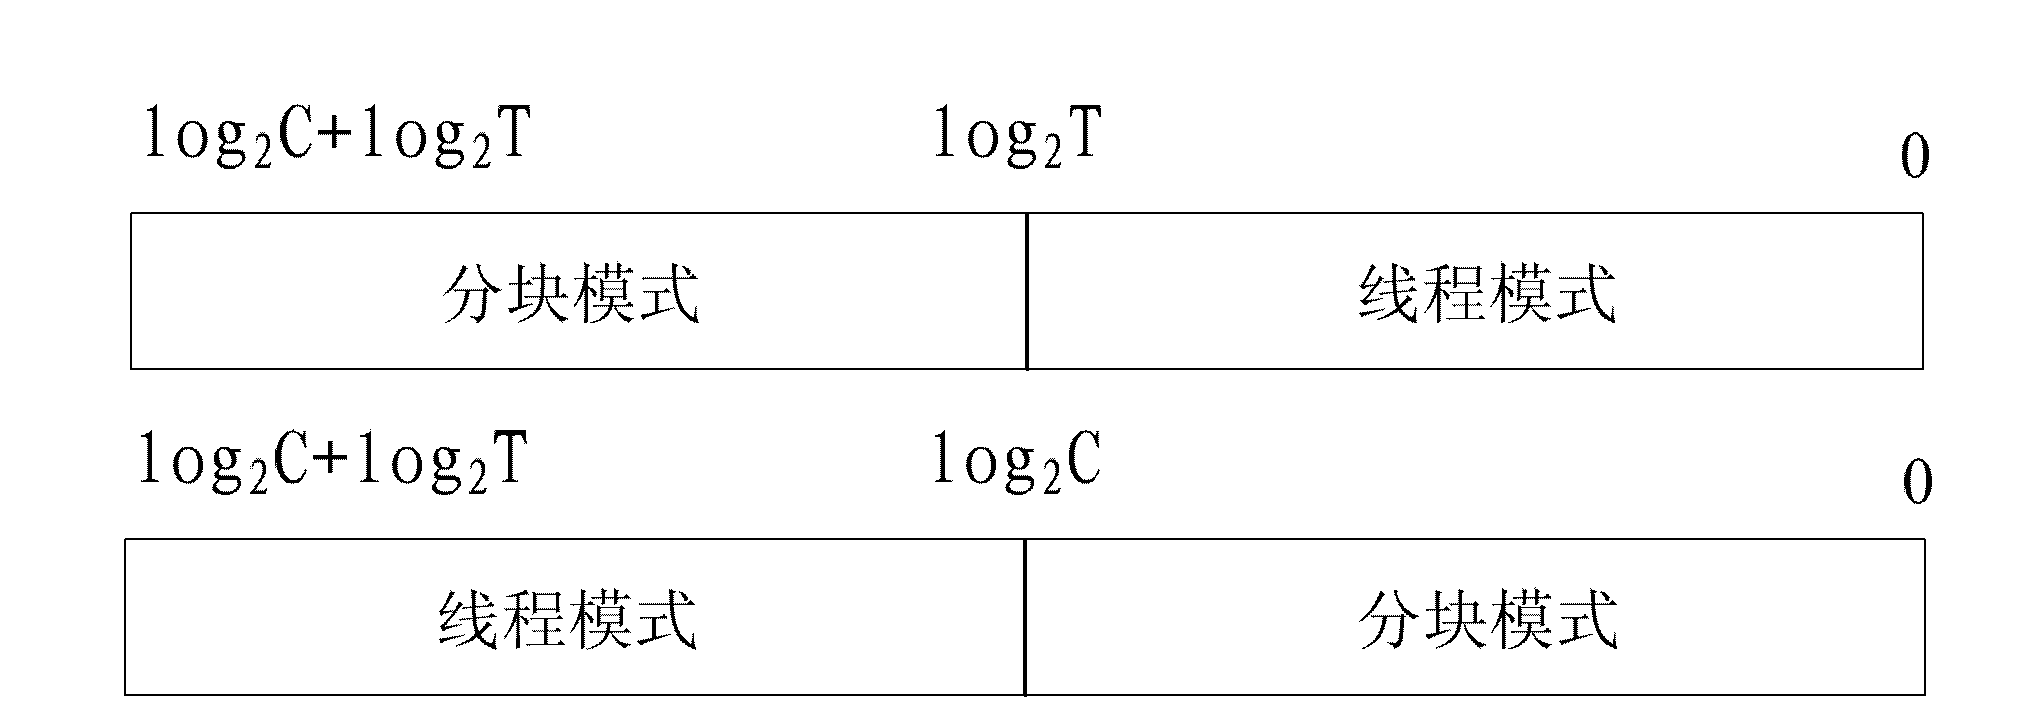 Configurable matrix register unit for supporting multi-width SIMD and multi-granularity SIMT